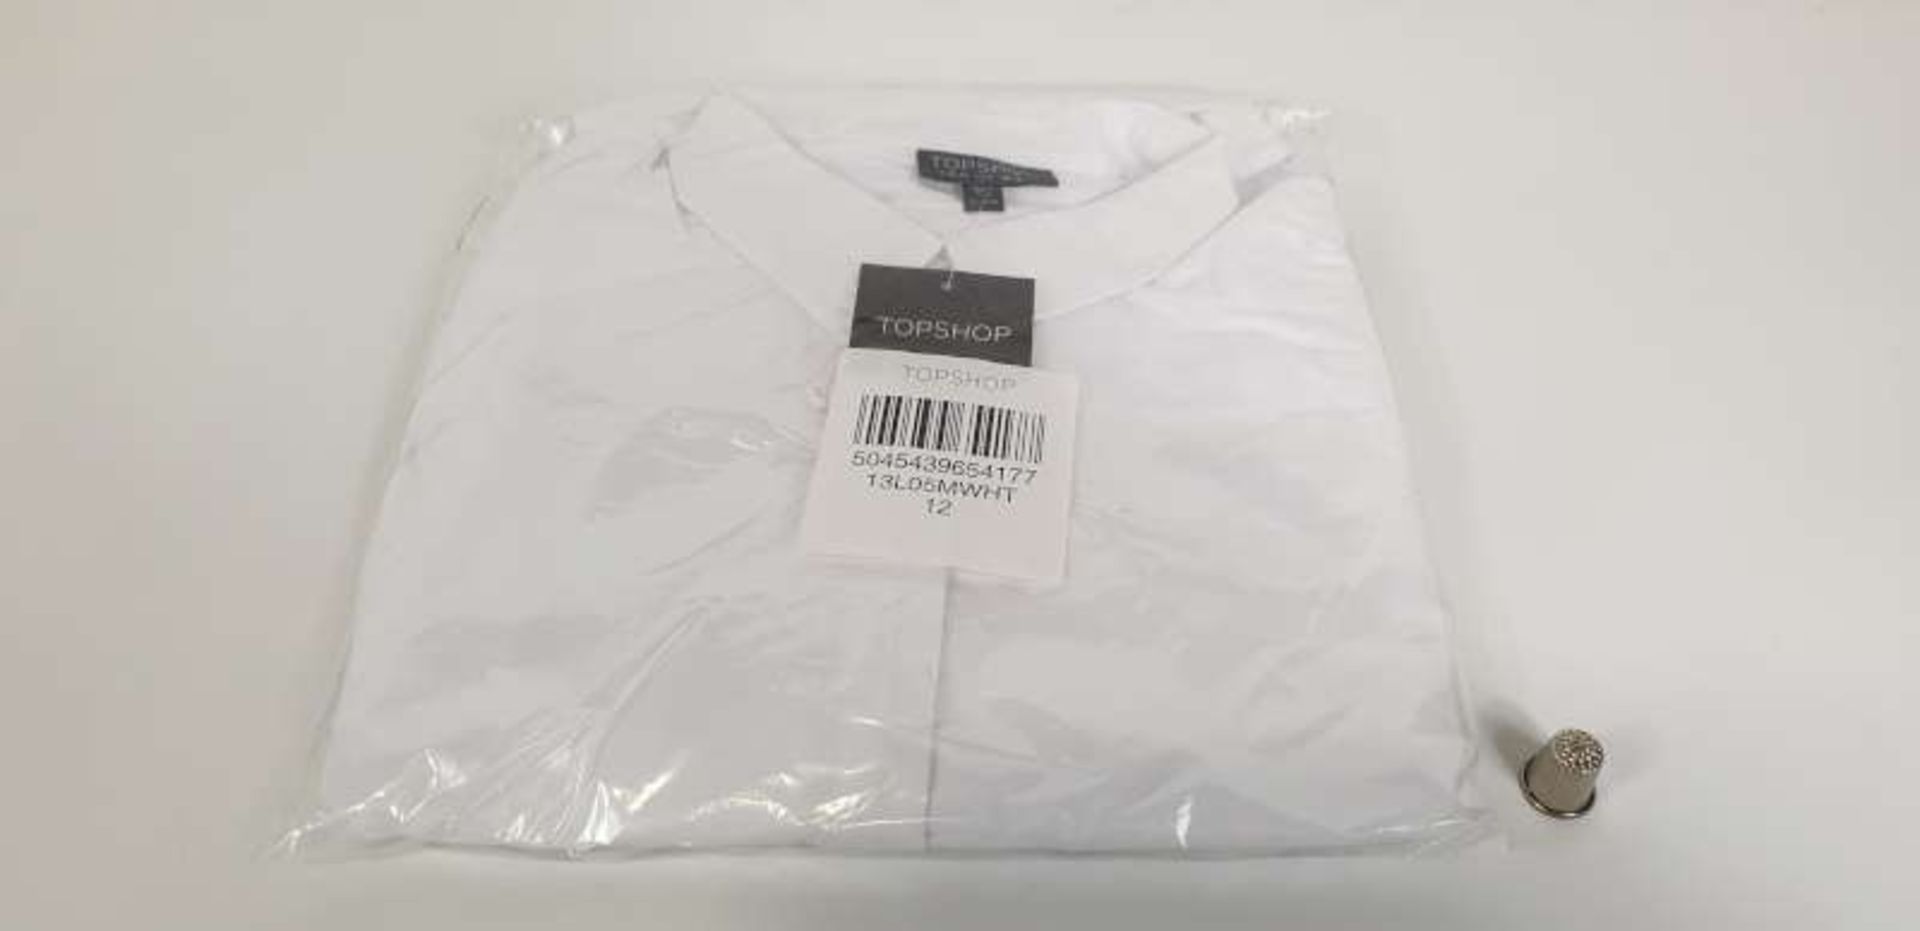 20 X BRAND NEW TOPSHOP CORSET SHIRTS SIZE 8, RRP OF EACH ITEM £34.00